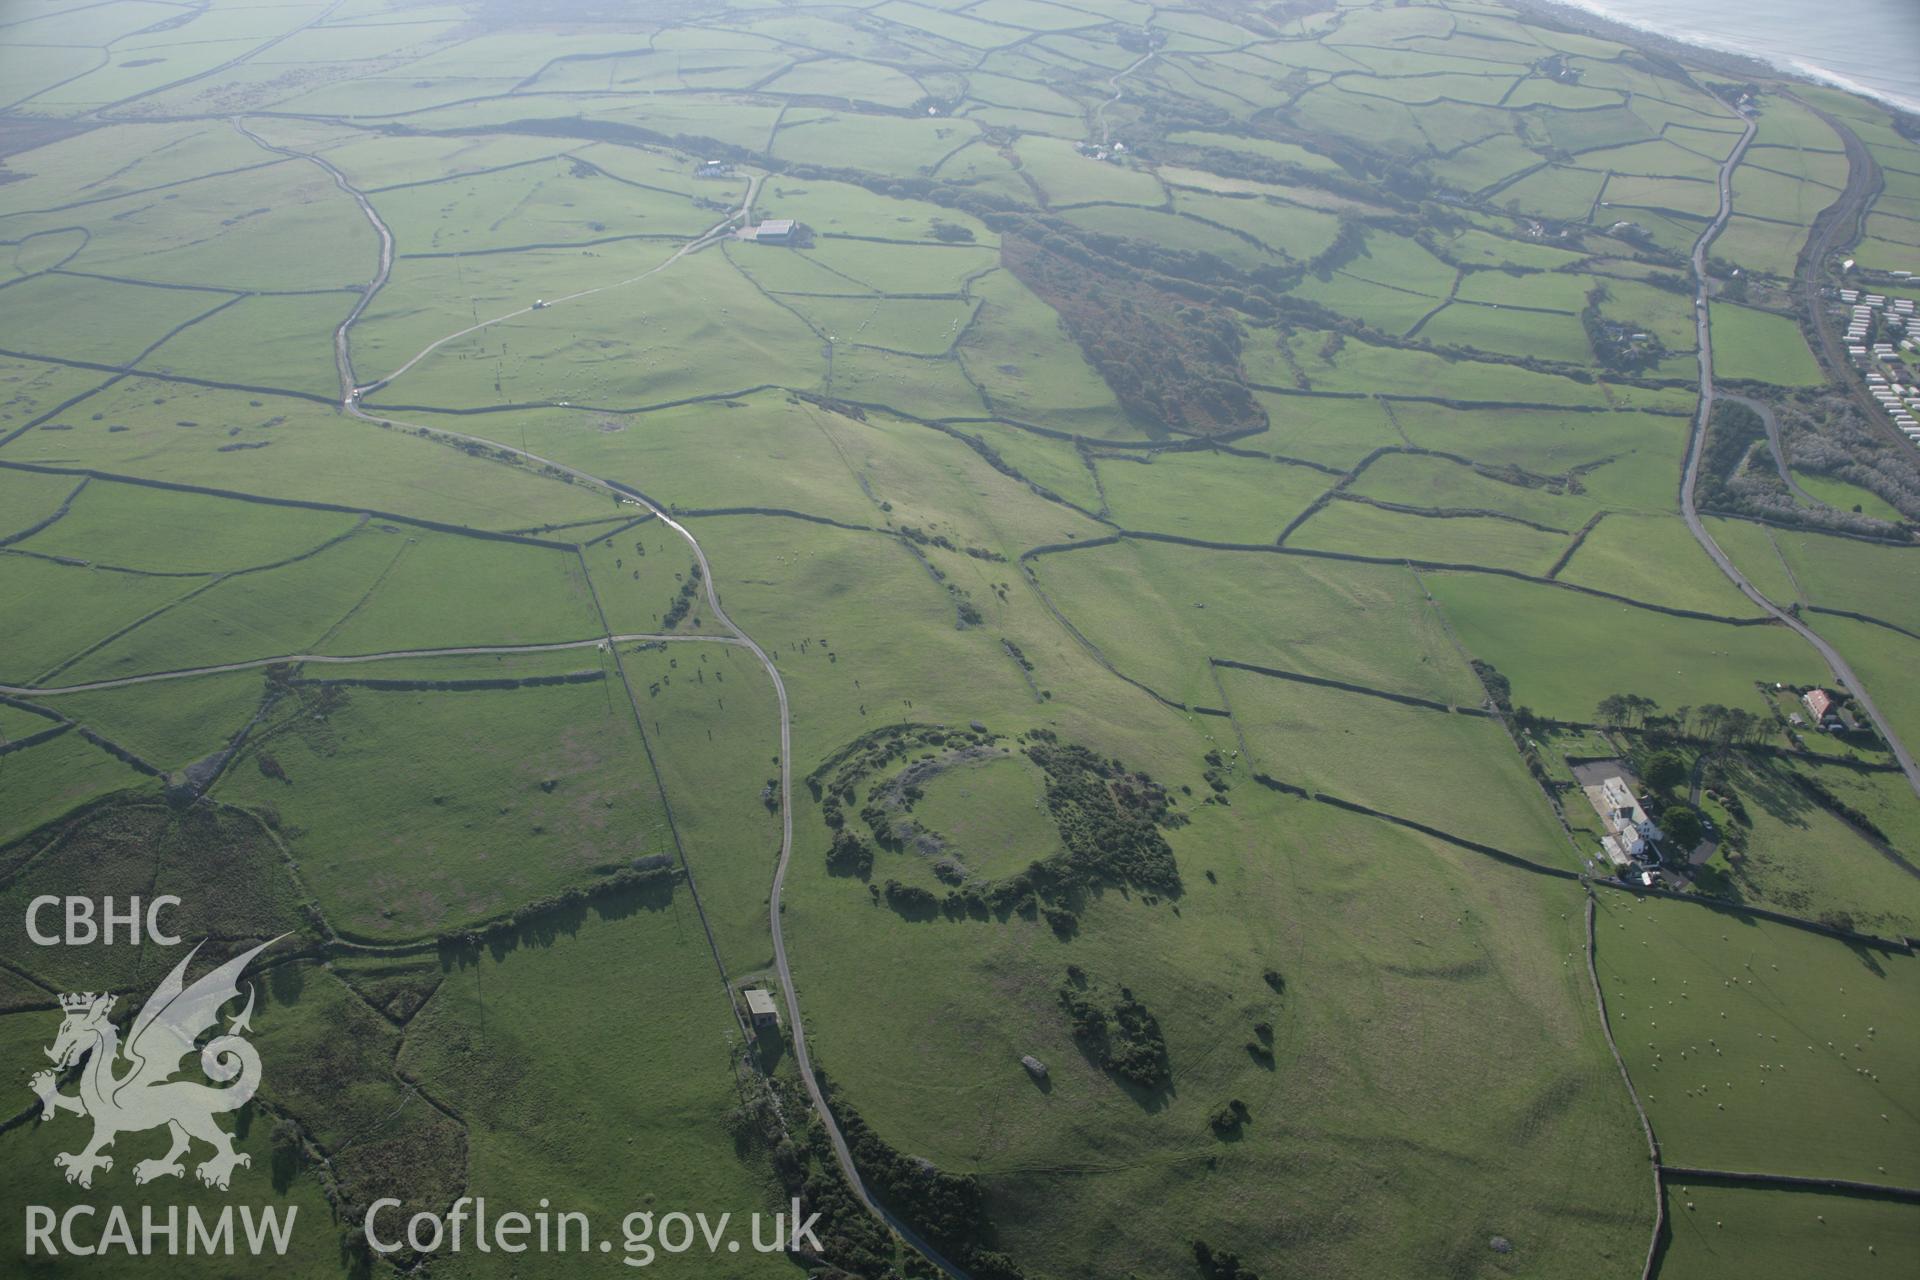 RCAHMW colour oblique aerial photograph of Castell-y-Gaer and nearby field systems. Viewed from the north. Taken on 17 October 2005 by Toby Driver